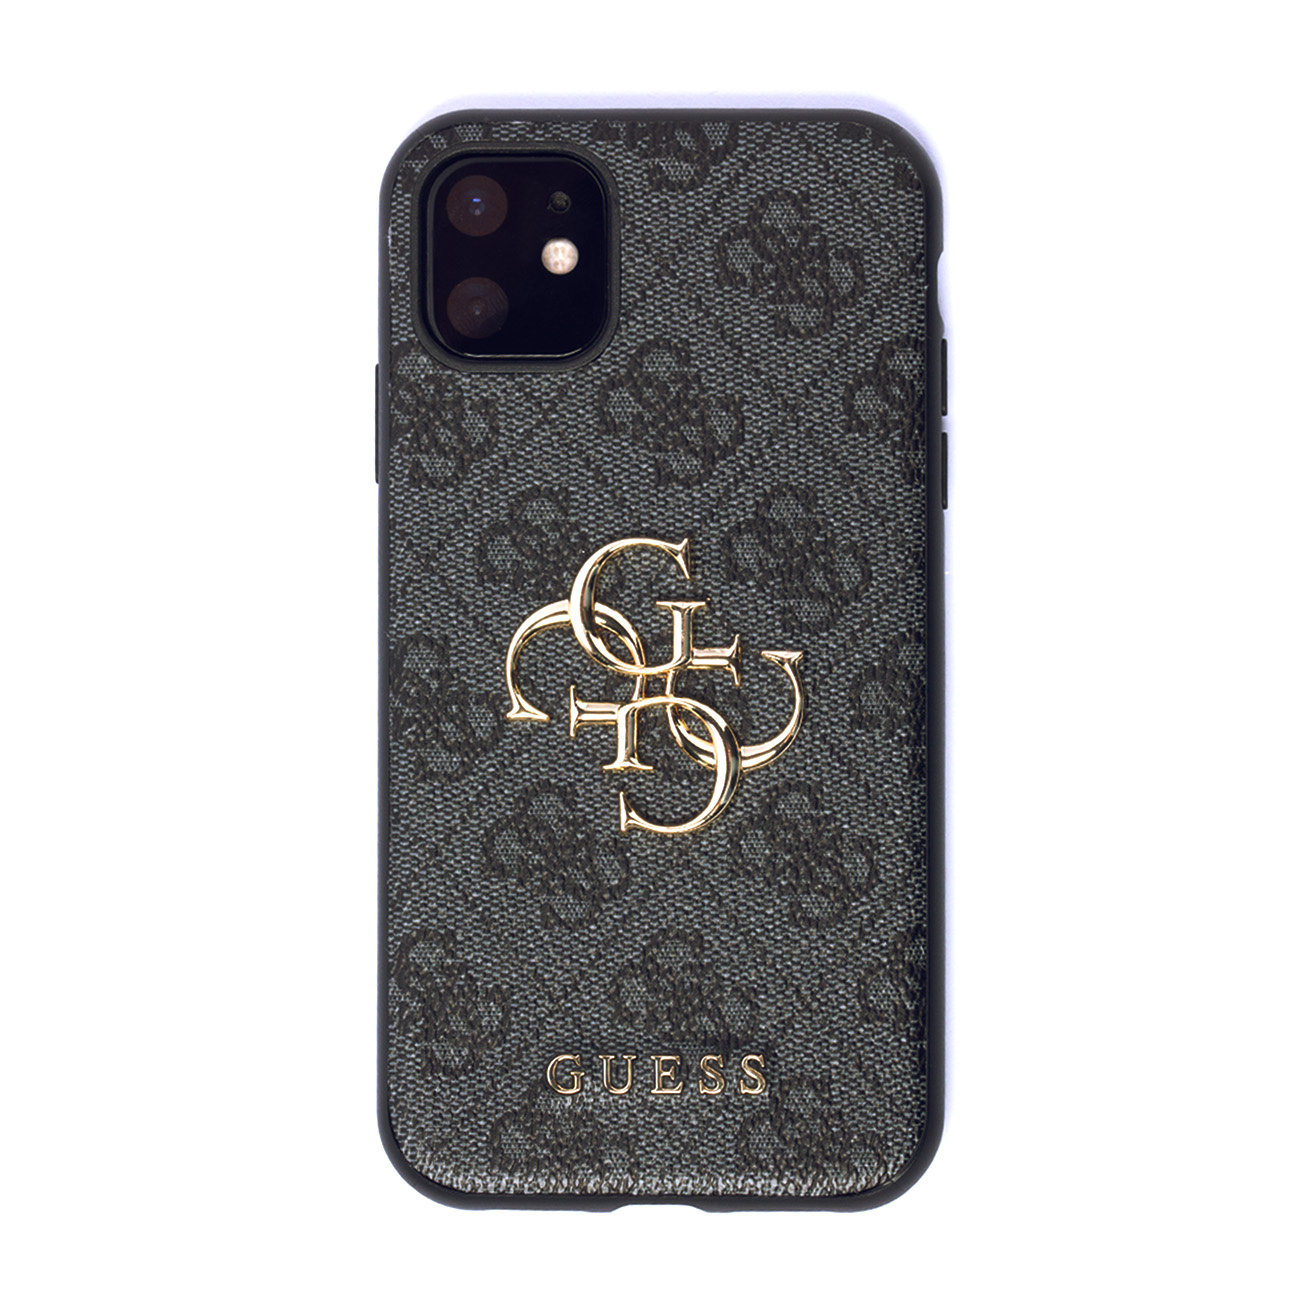 Guess front case for iPhone 11 / XR from the 4G Big Metal Logo series